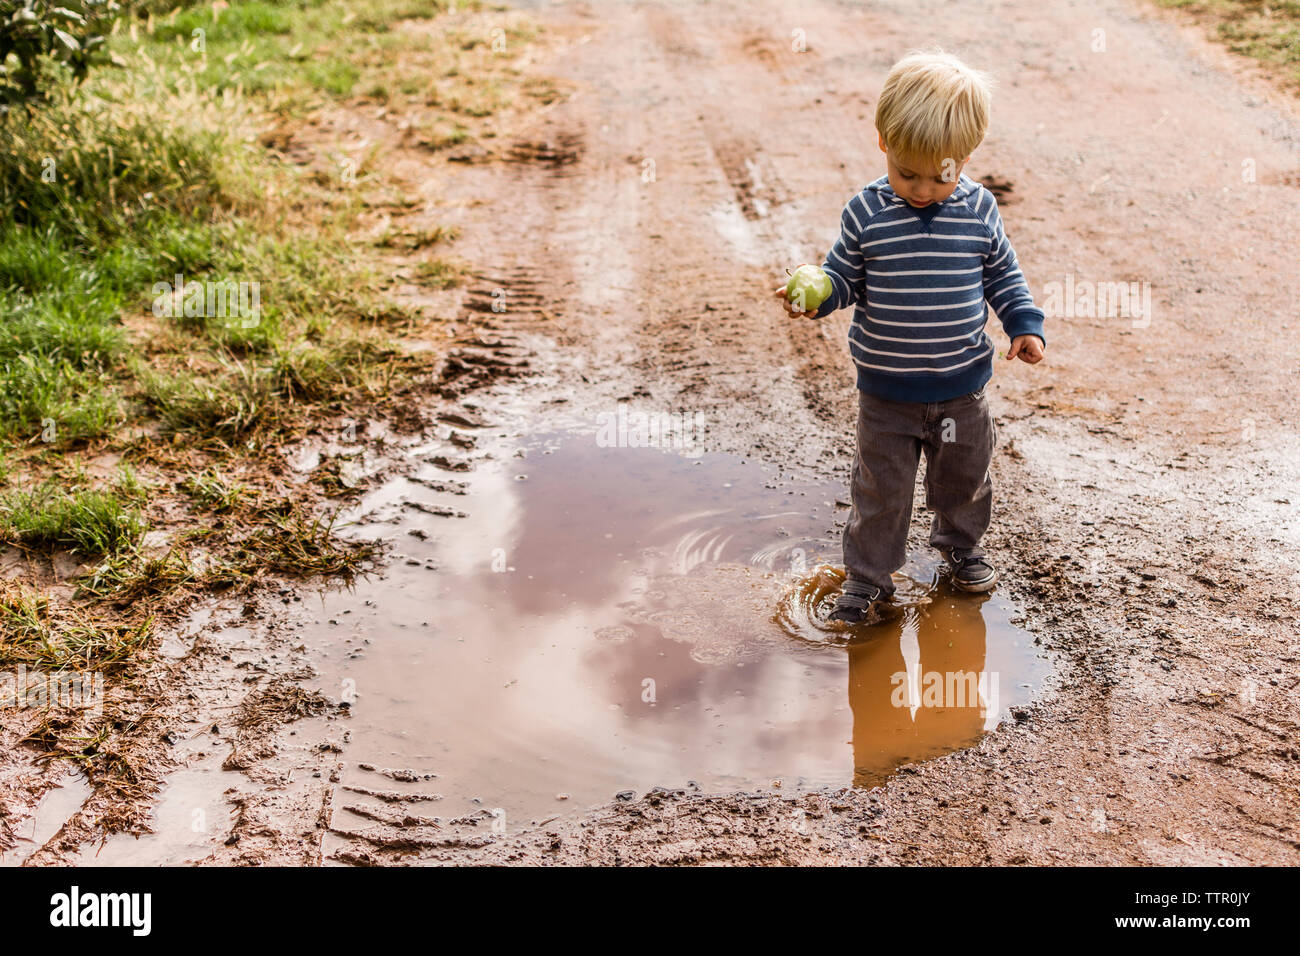 Boy with apple standing in dirty puddle Stock Photo